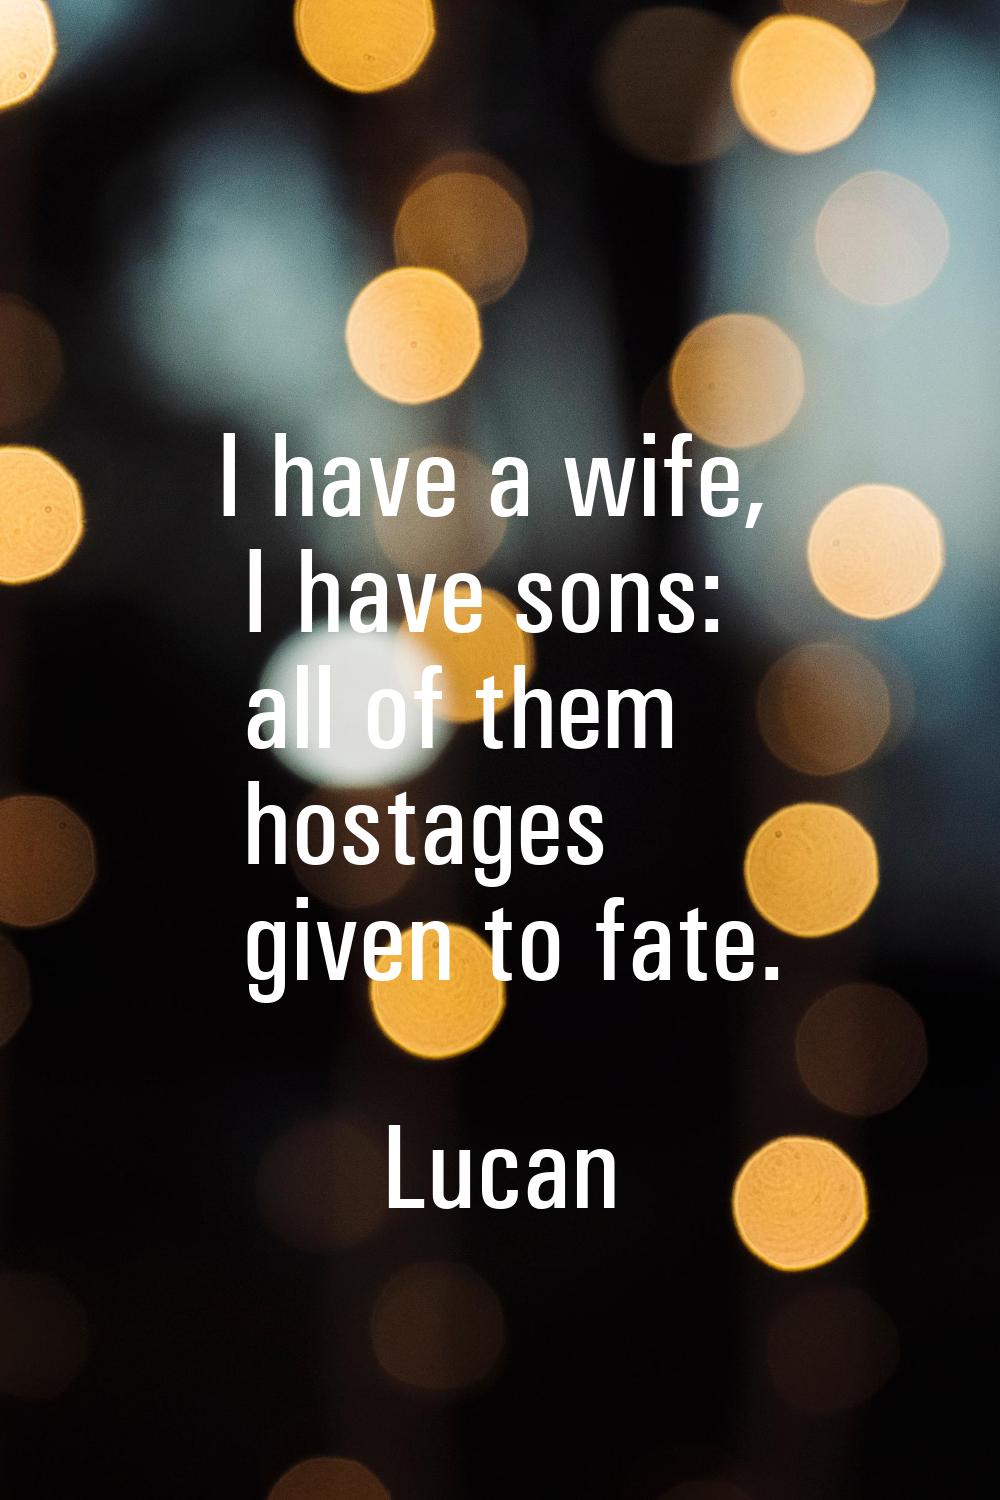 I have a wife, I have sons: all of them hostages given to fate.